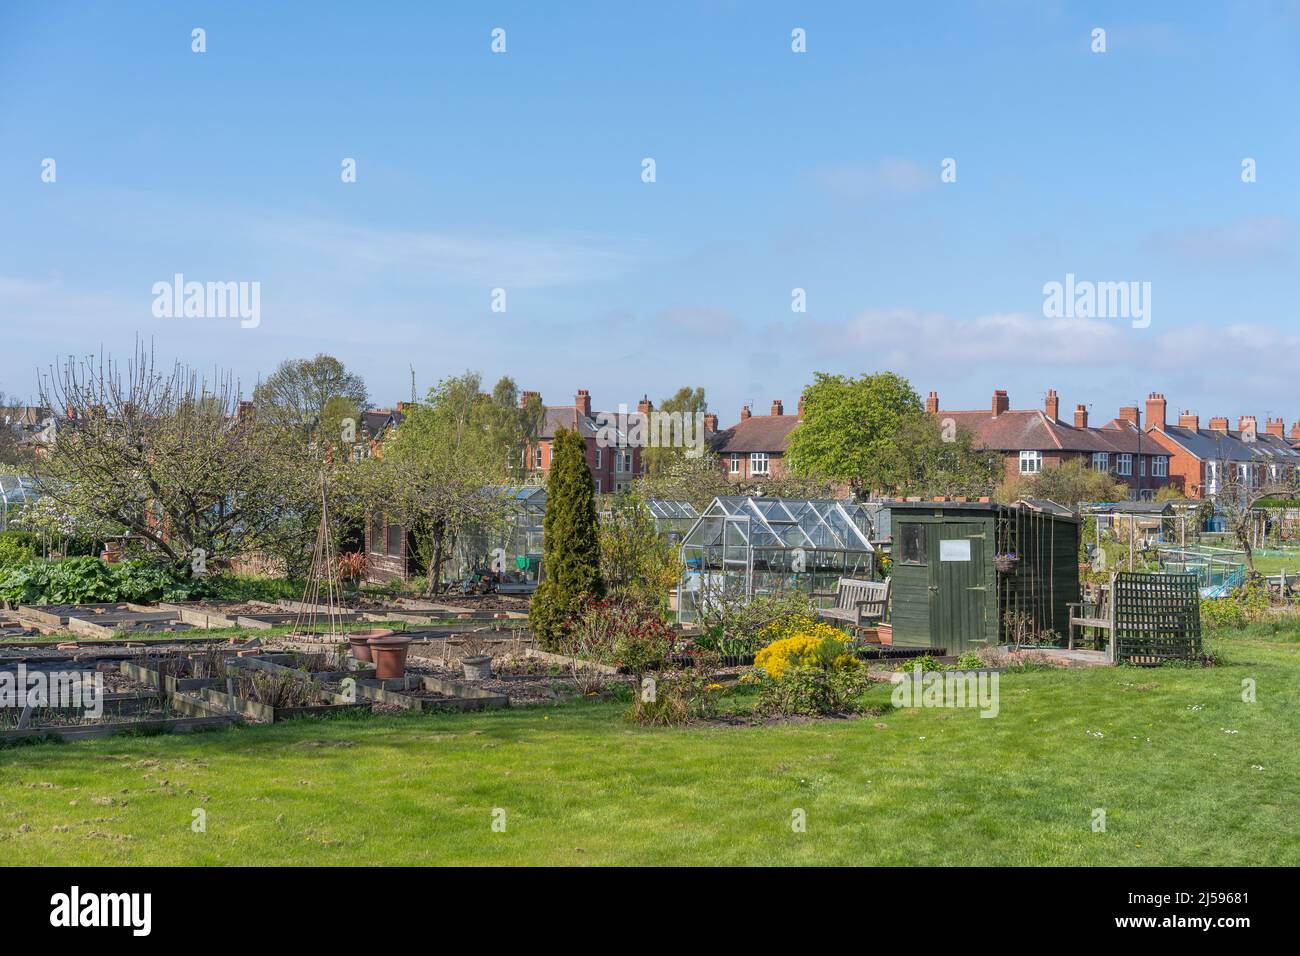 View over the allotment with raised beds, greenhouse and shed, Newcastle upon Tyne, UK. Credit: Hazel Plater/Alamy Stock Photo